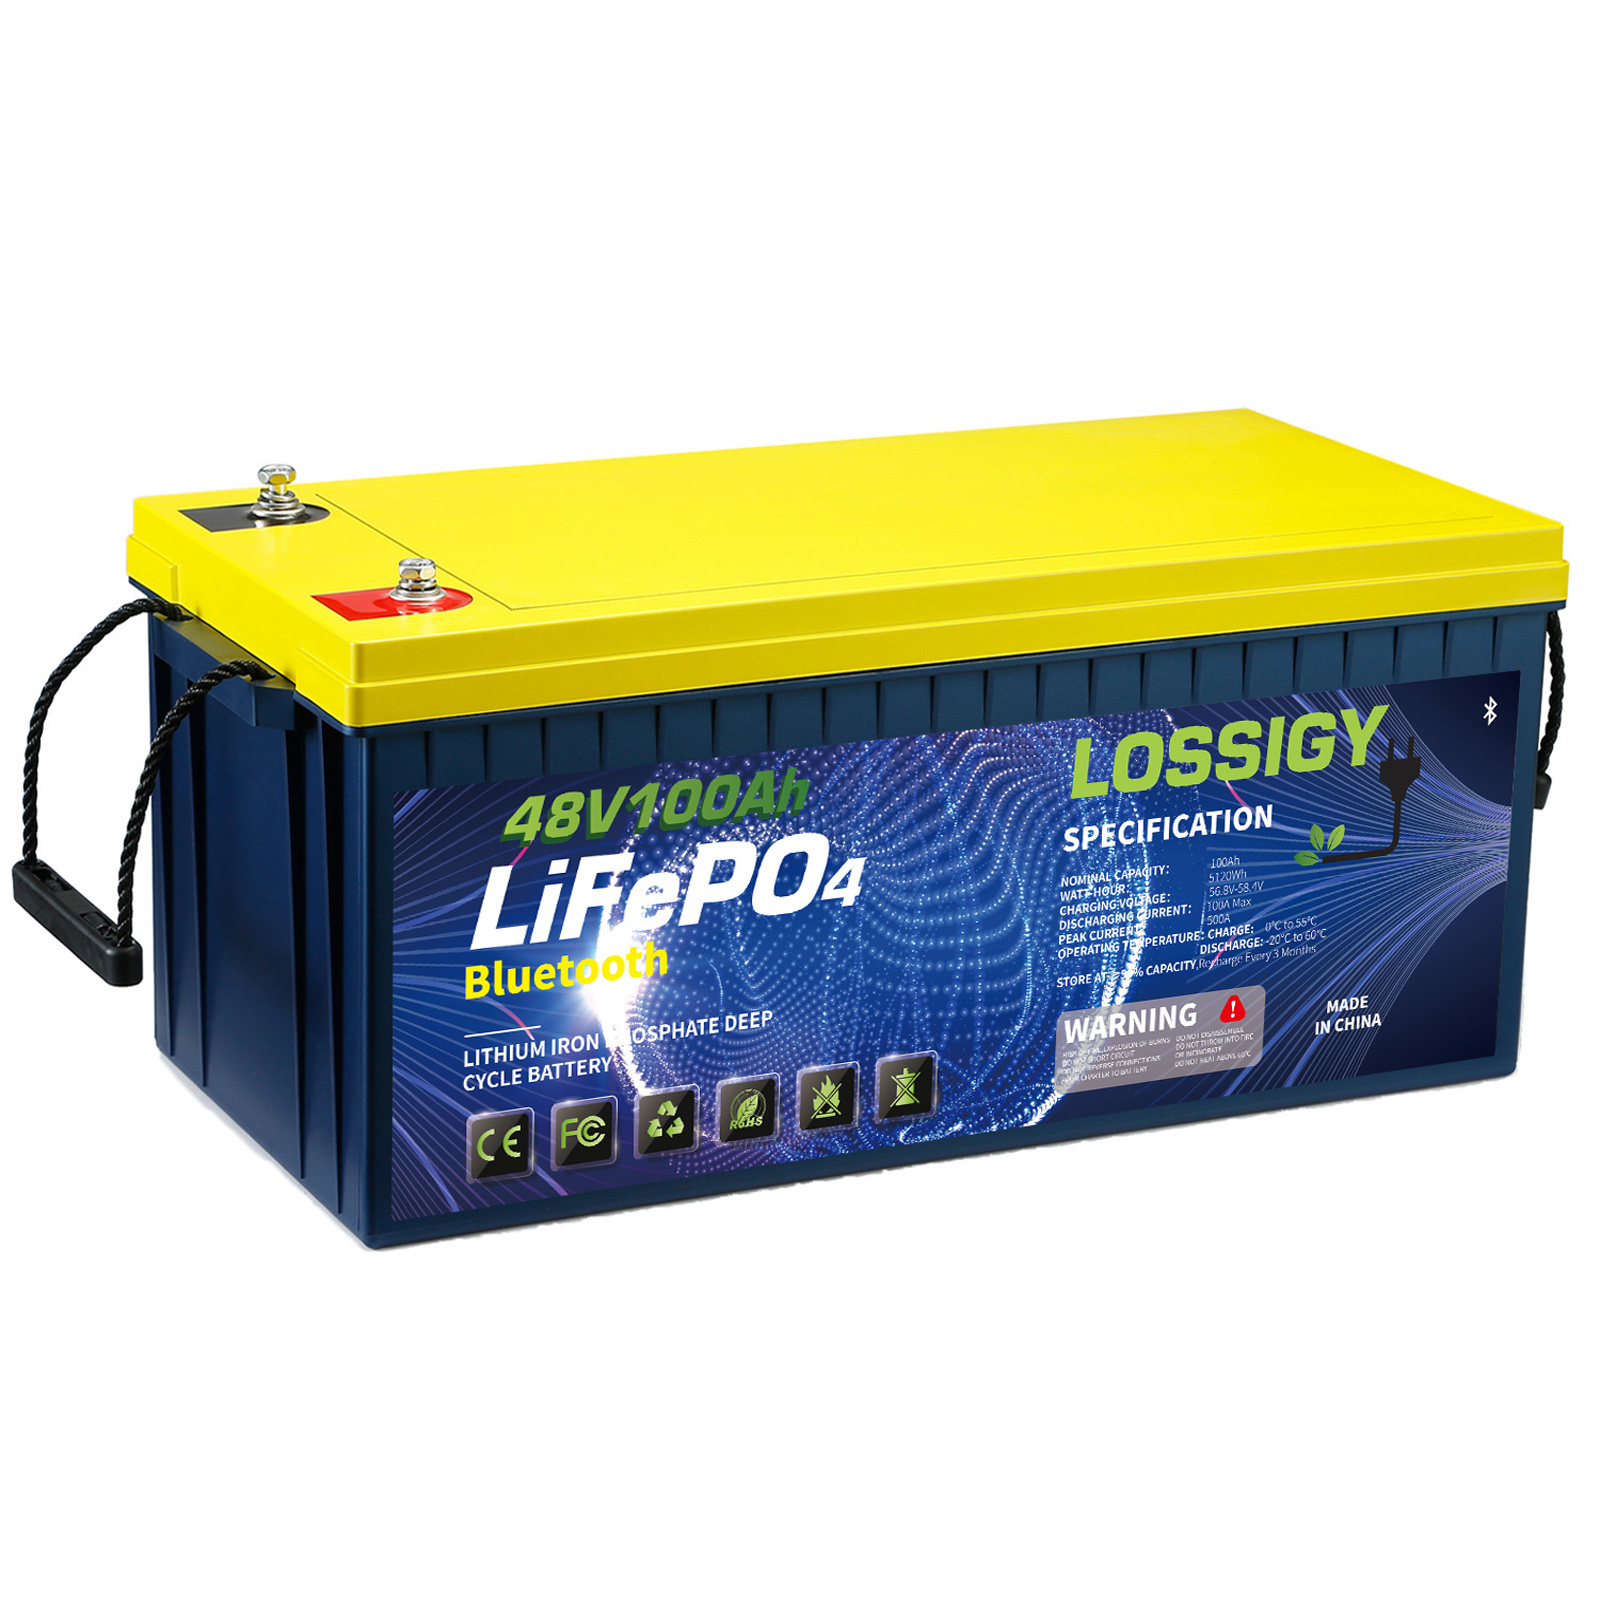 48V 100AH Lifepo4 Deep Cycle Lithium Battery with Bluetooth( Built